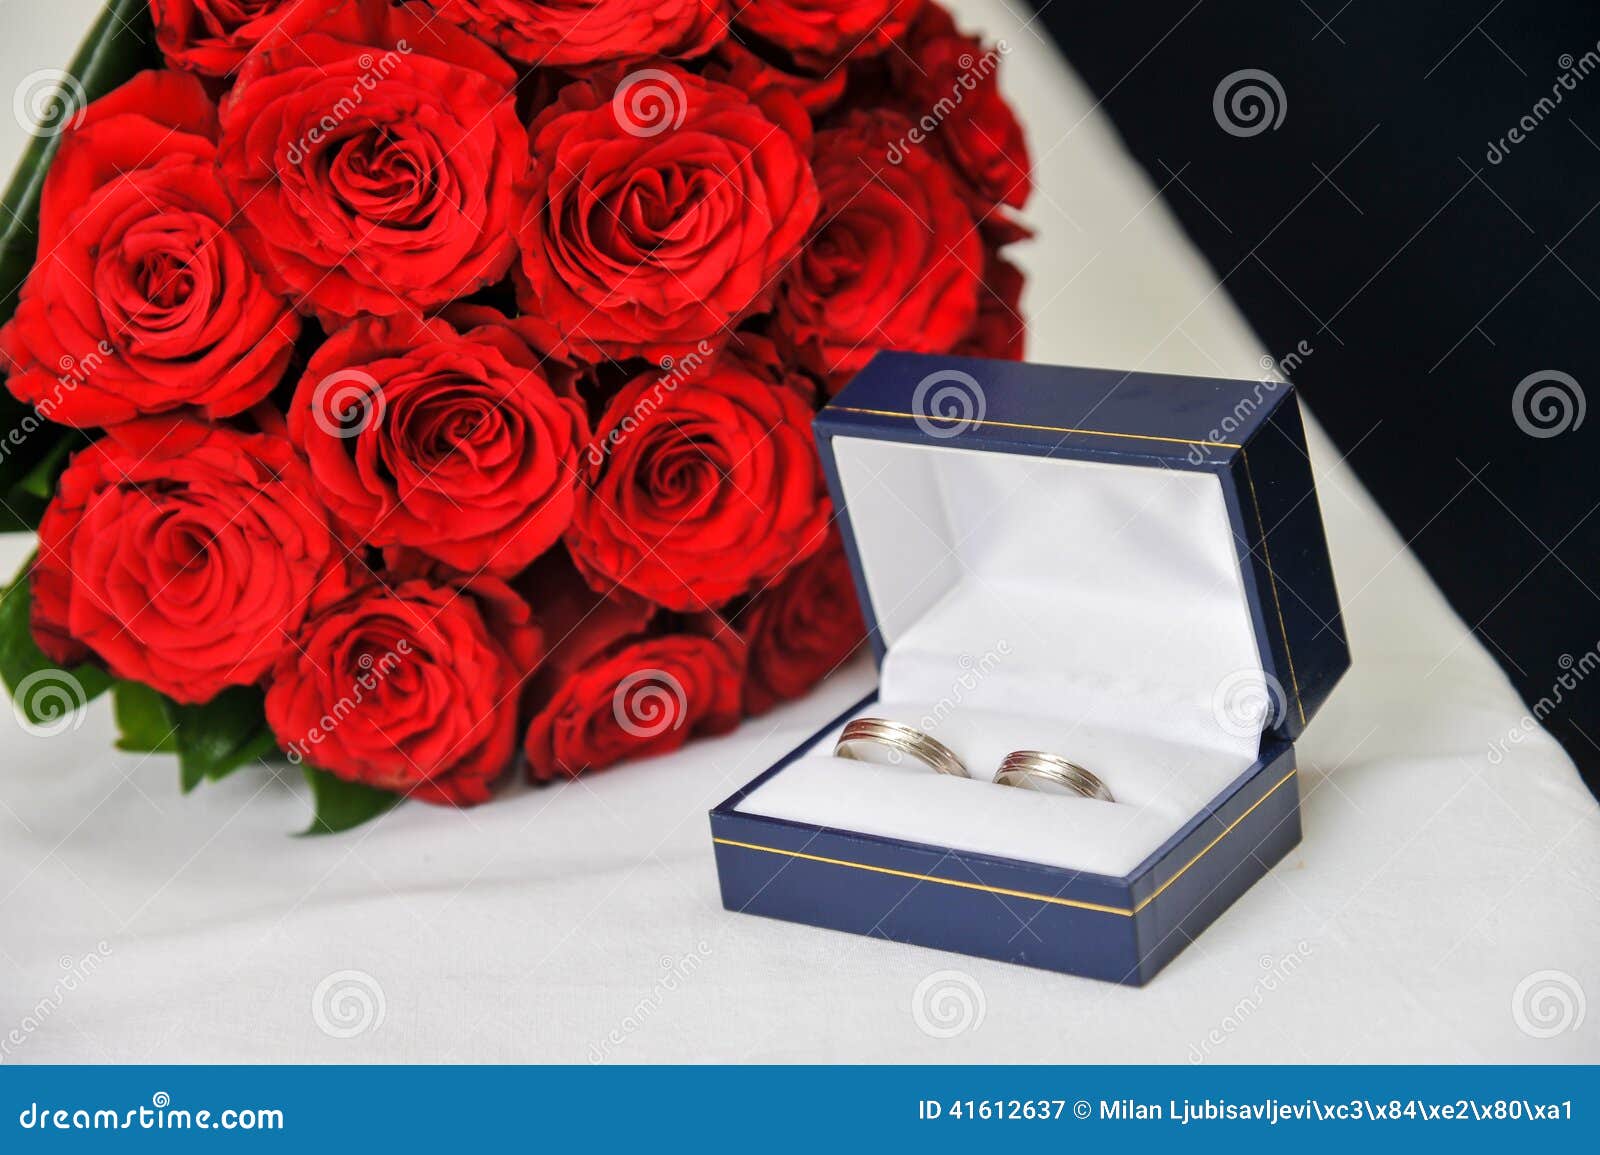 Wedding Rings in a Box stock image. Image of romance - 41612637